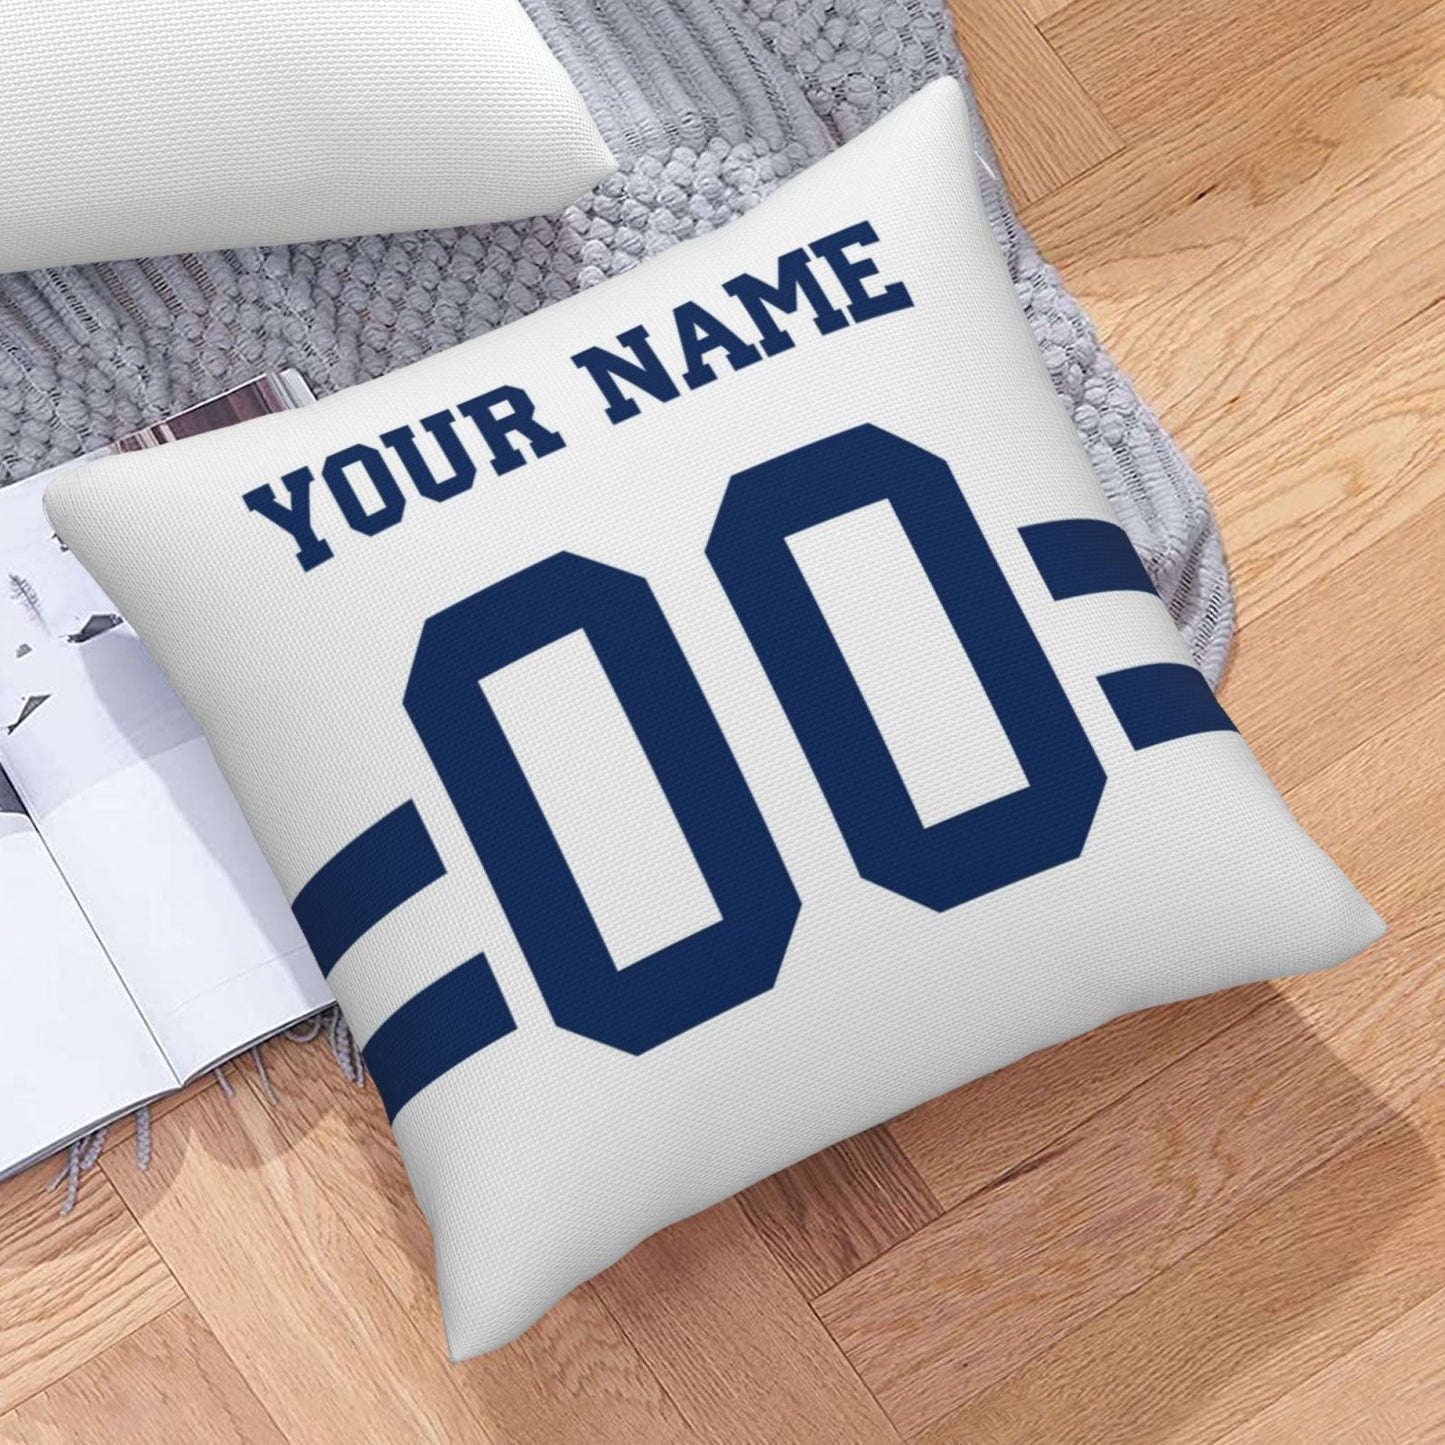 Customized Indianapolis Colts Football Team Decorative Throw Pillow Case Print Personalized Football Style Fans Letters & Number White Pillowcase Housewarming Gifts